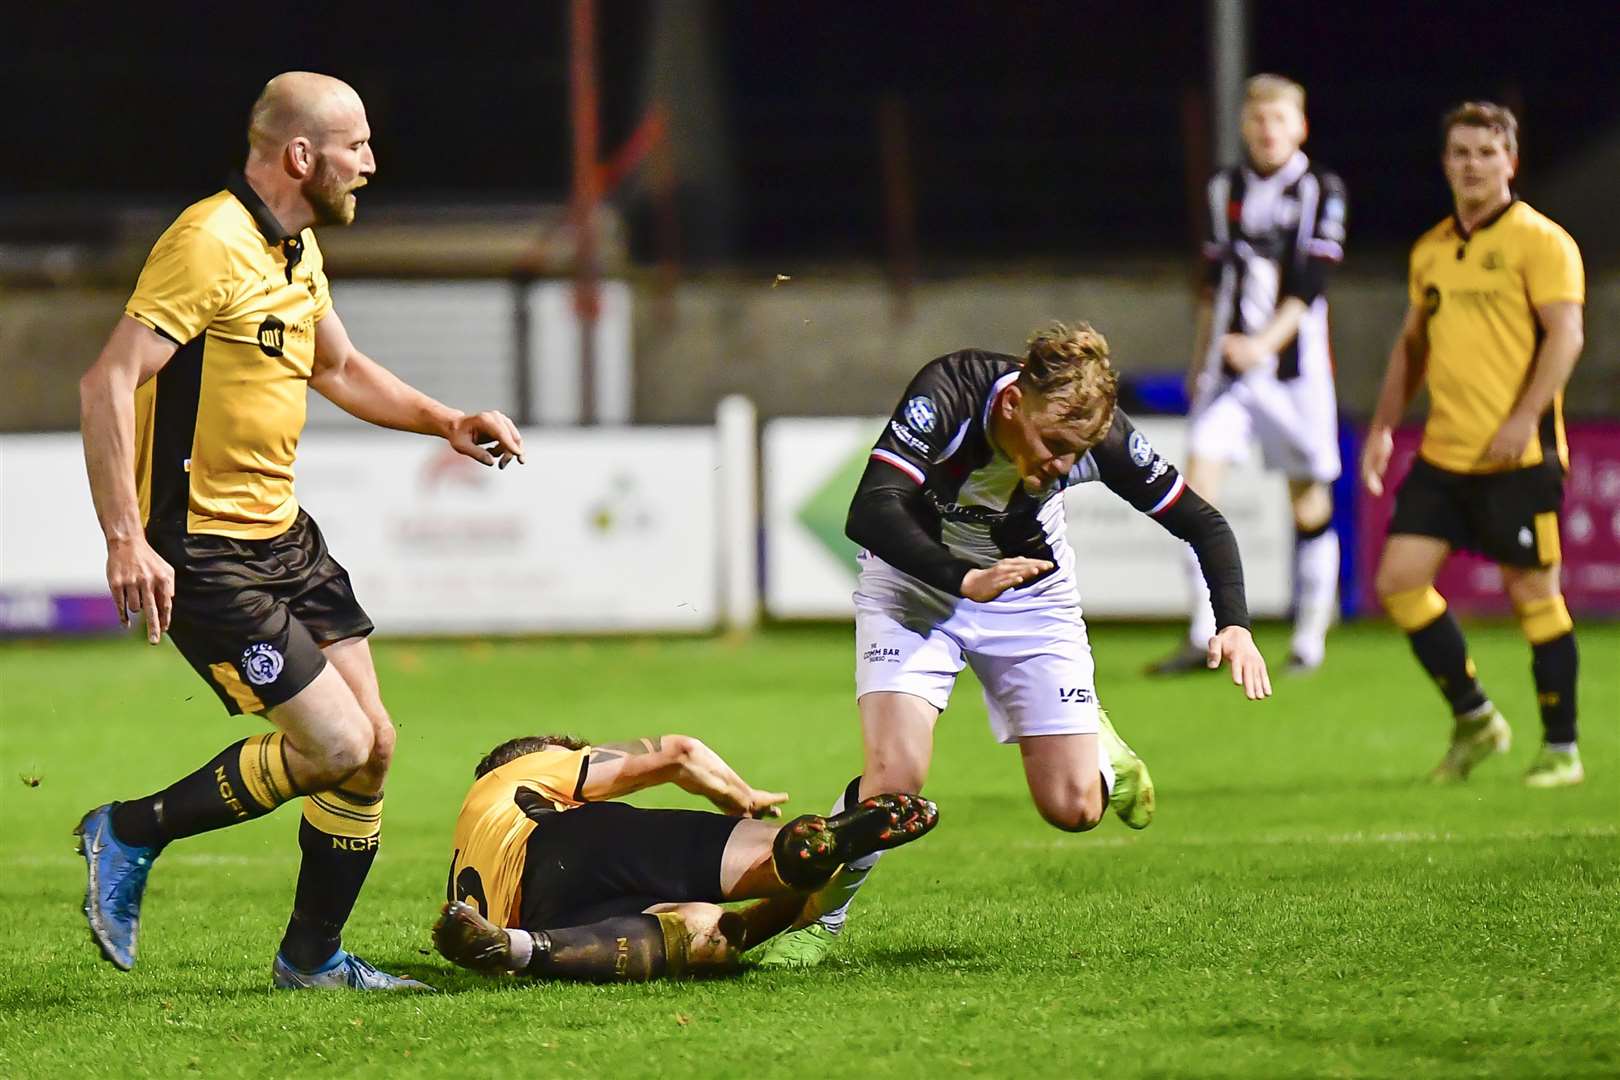 Mark Macadie of Wick Academy is brought down by Nairn's Wayne Mackintosh. Picture: Mel Roger